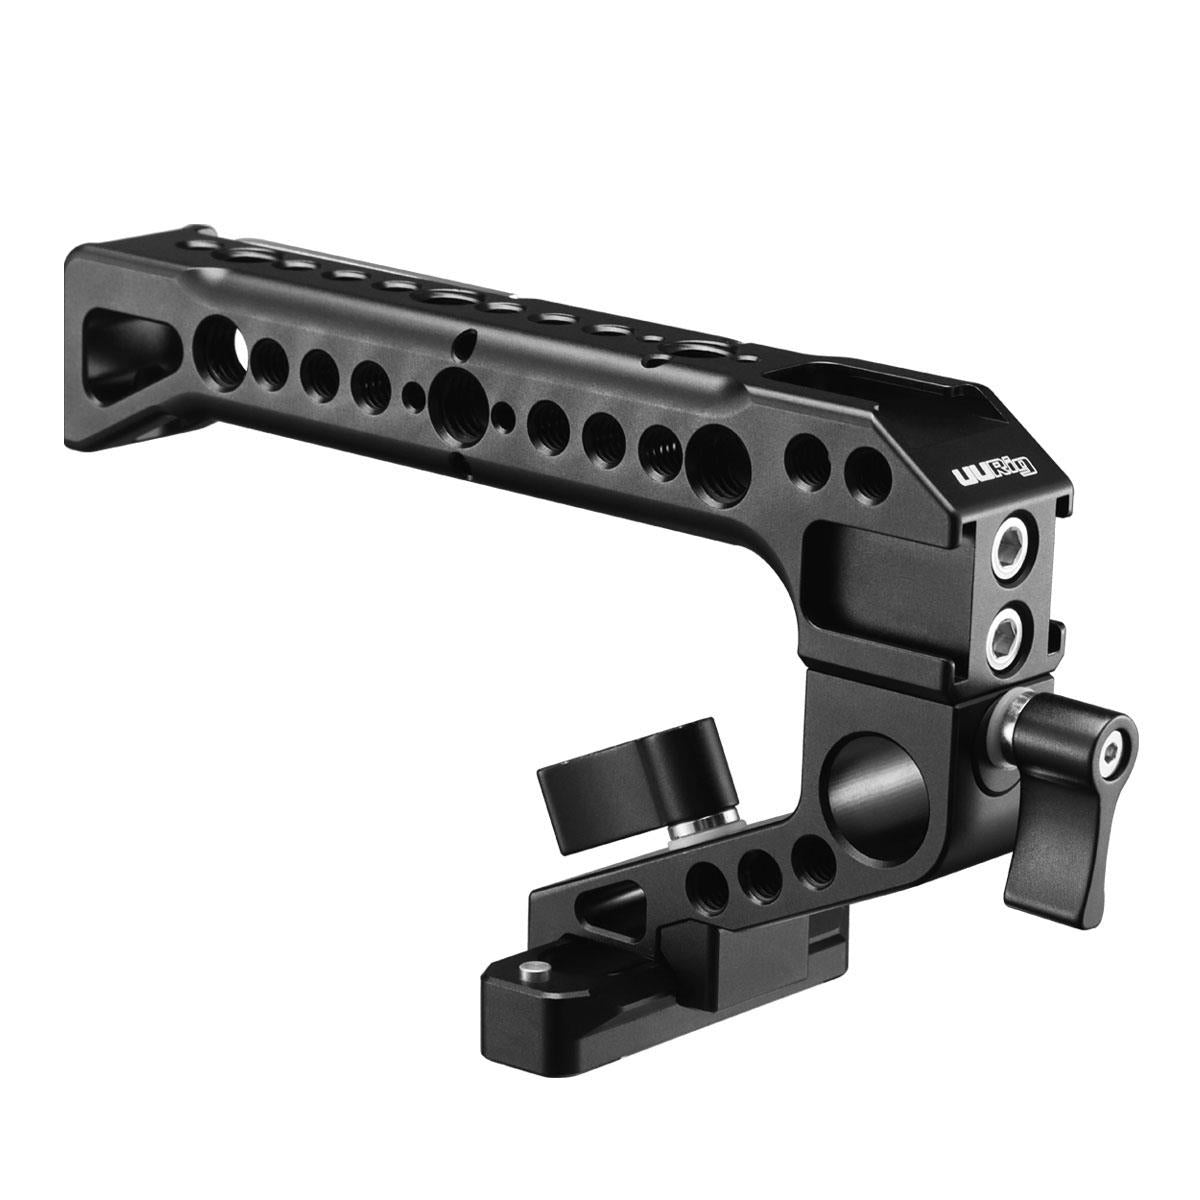 UURIG by Ulanzi R042 Universal NATO Handle with Anti-Off Quick Release NATO Rail for Cameras Microphones LED Lights